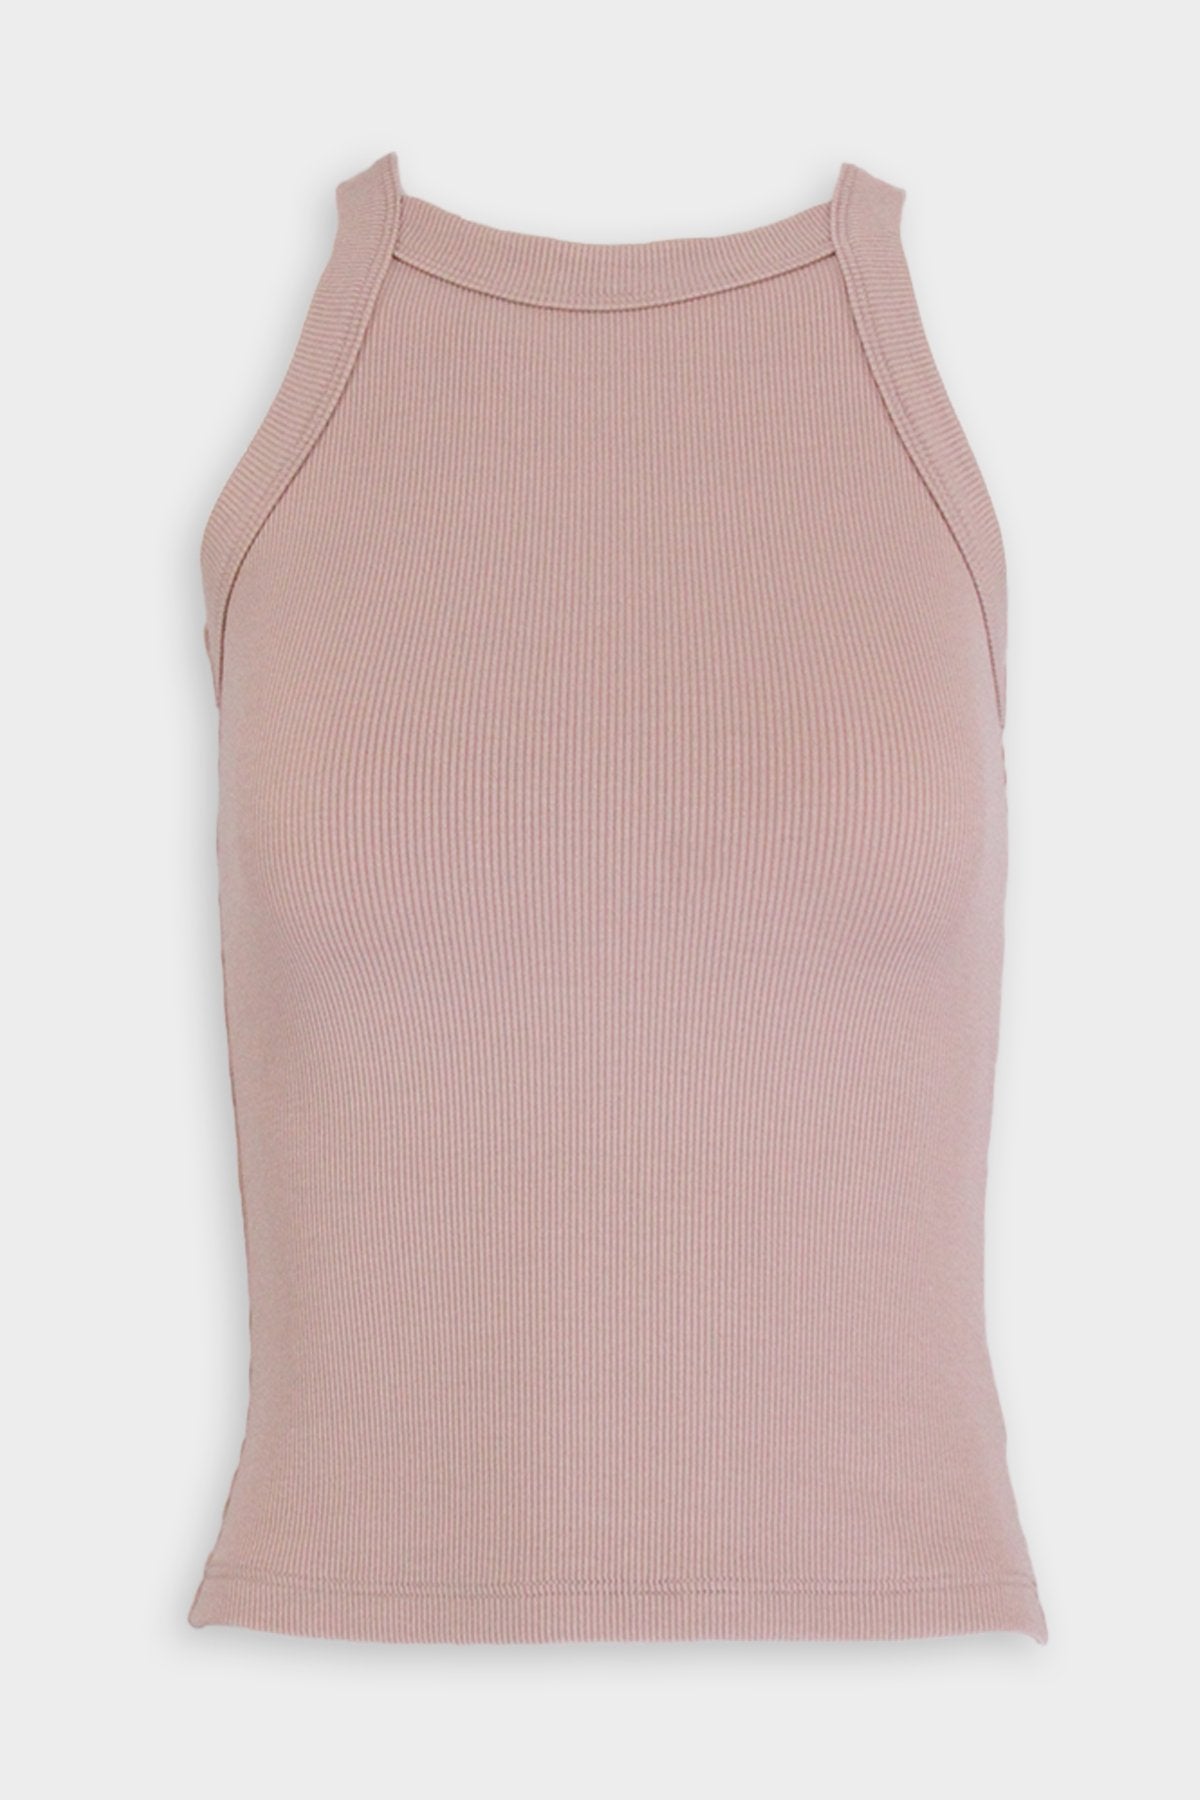 Ribbed Dylan Tank in Nude - shop-olivia.com